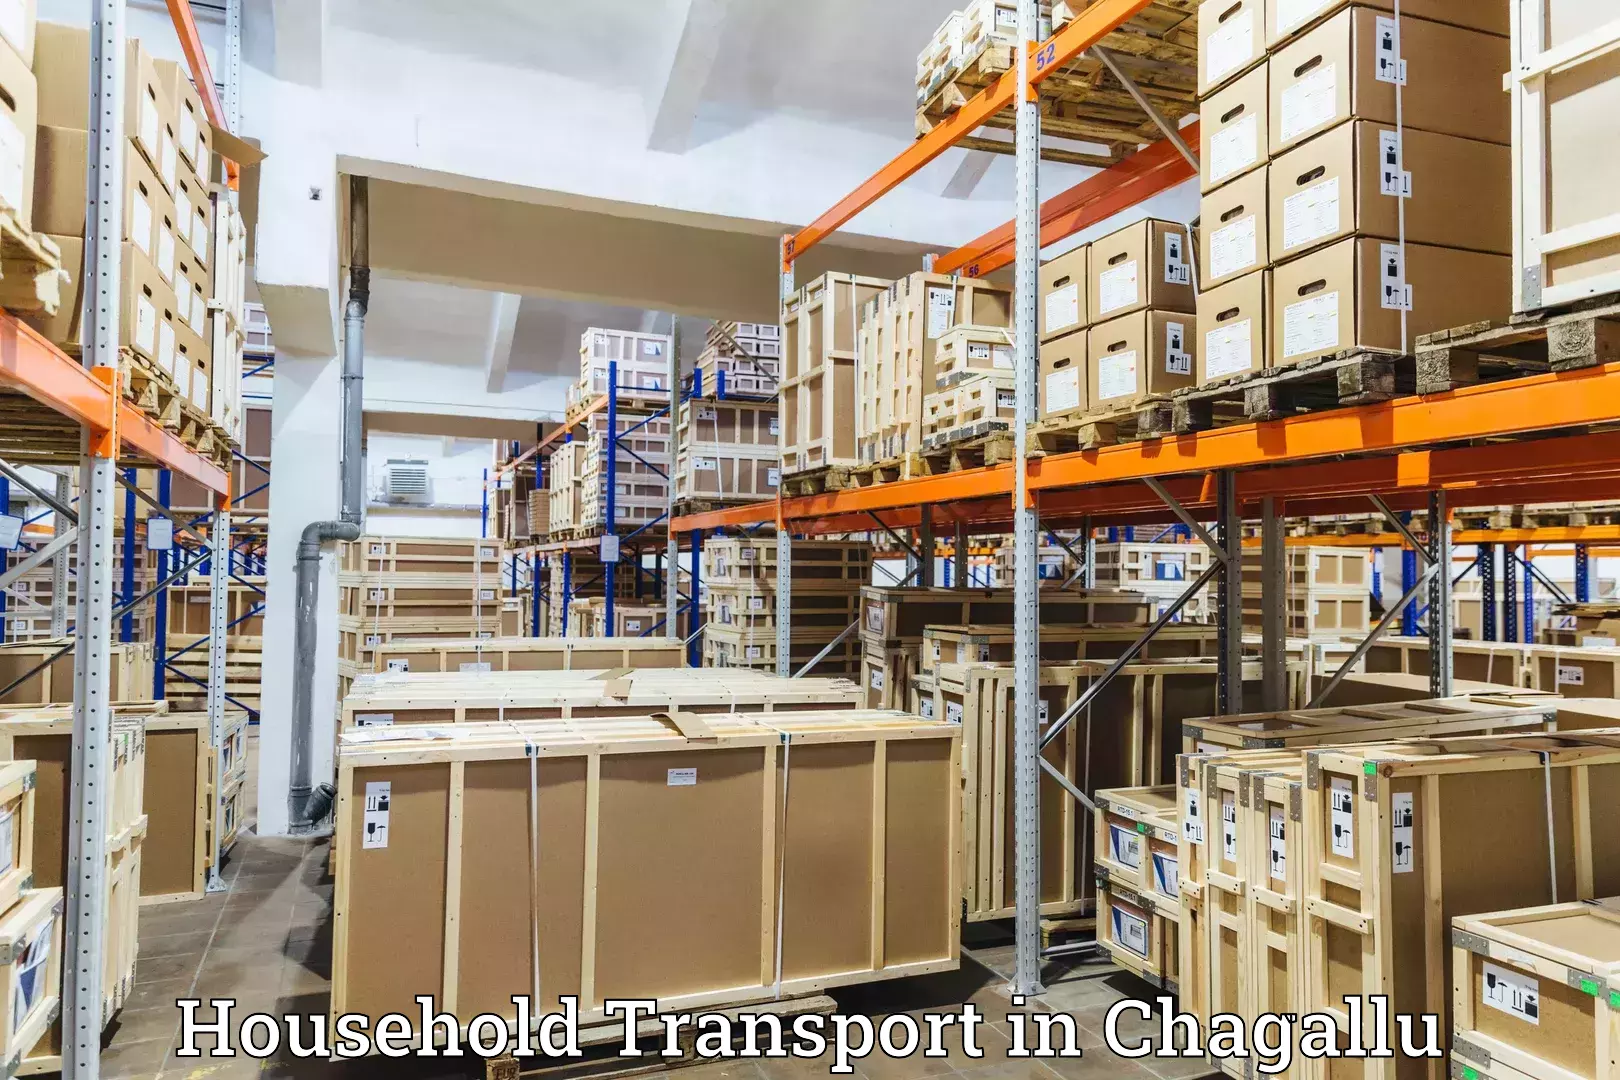 Household goods transport service in Chagallu